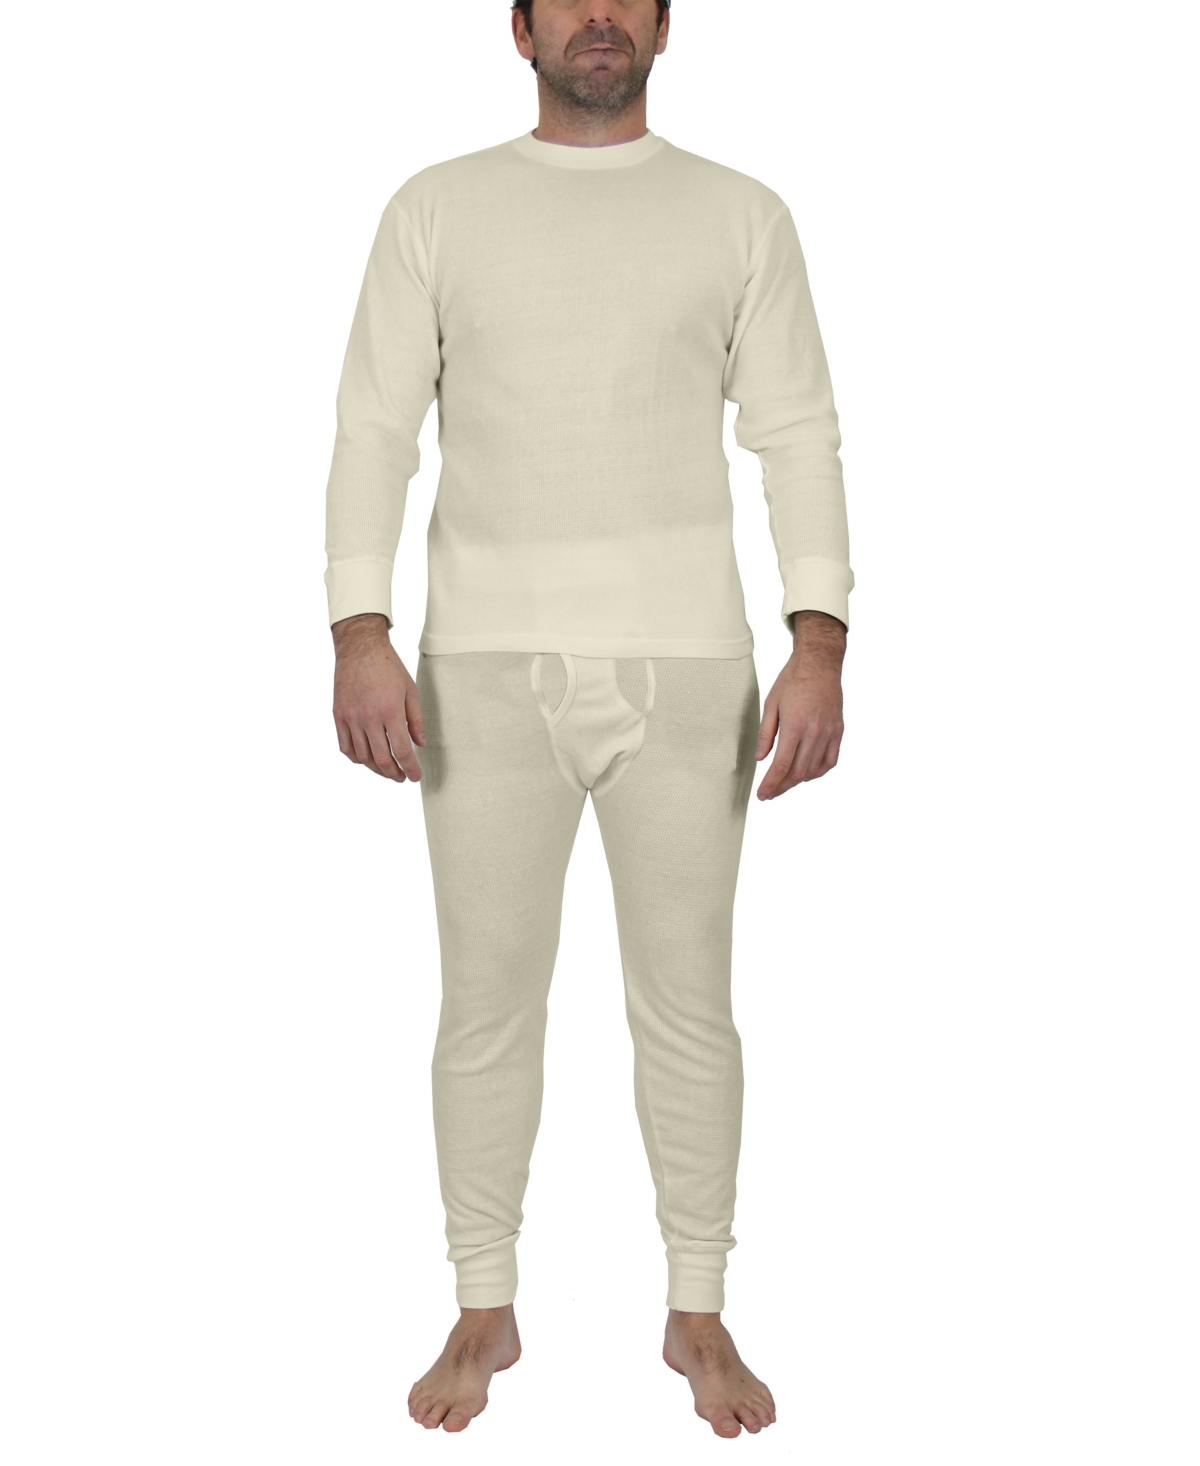 Men's Winter Thermal Top and Bottom, 2 Piece Set - Natural